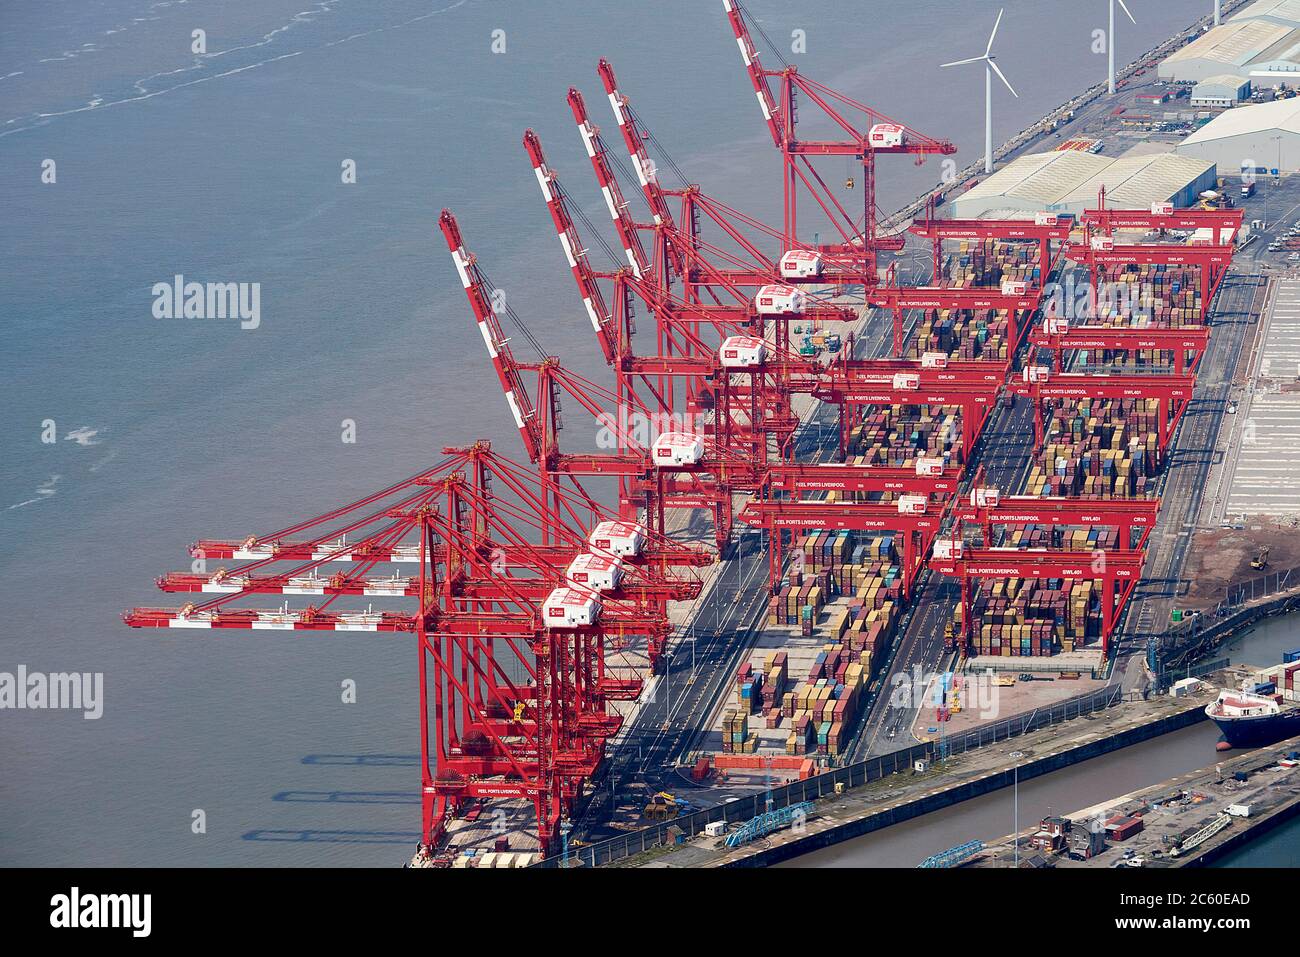 An aerial view of Peel Port, Seaforth Docks, Liverpool, Merseyside, North West England, UK Stock Photo